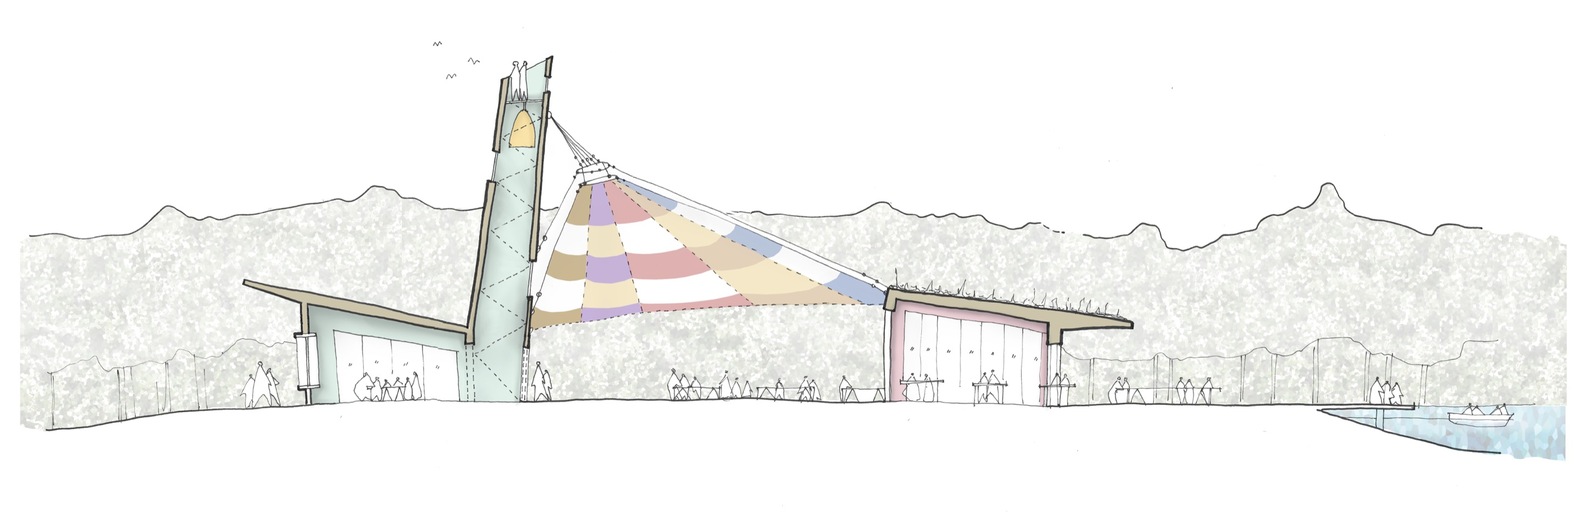 Tate Harmer's-Big Tent-Wins Competition for new Museum of Sc